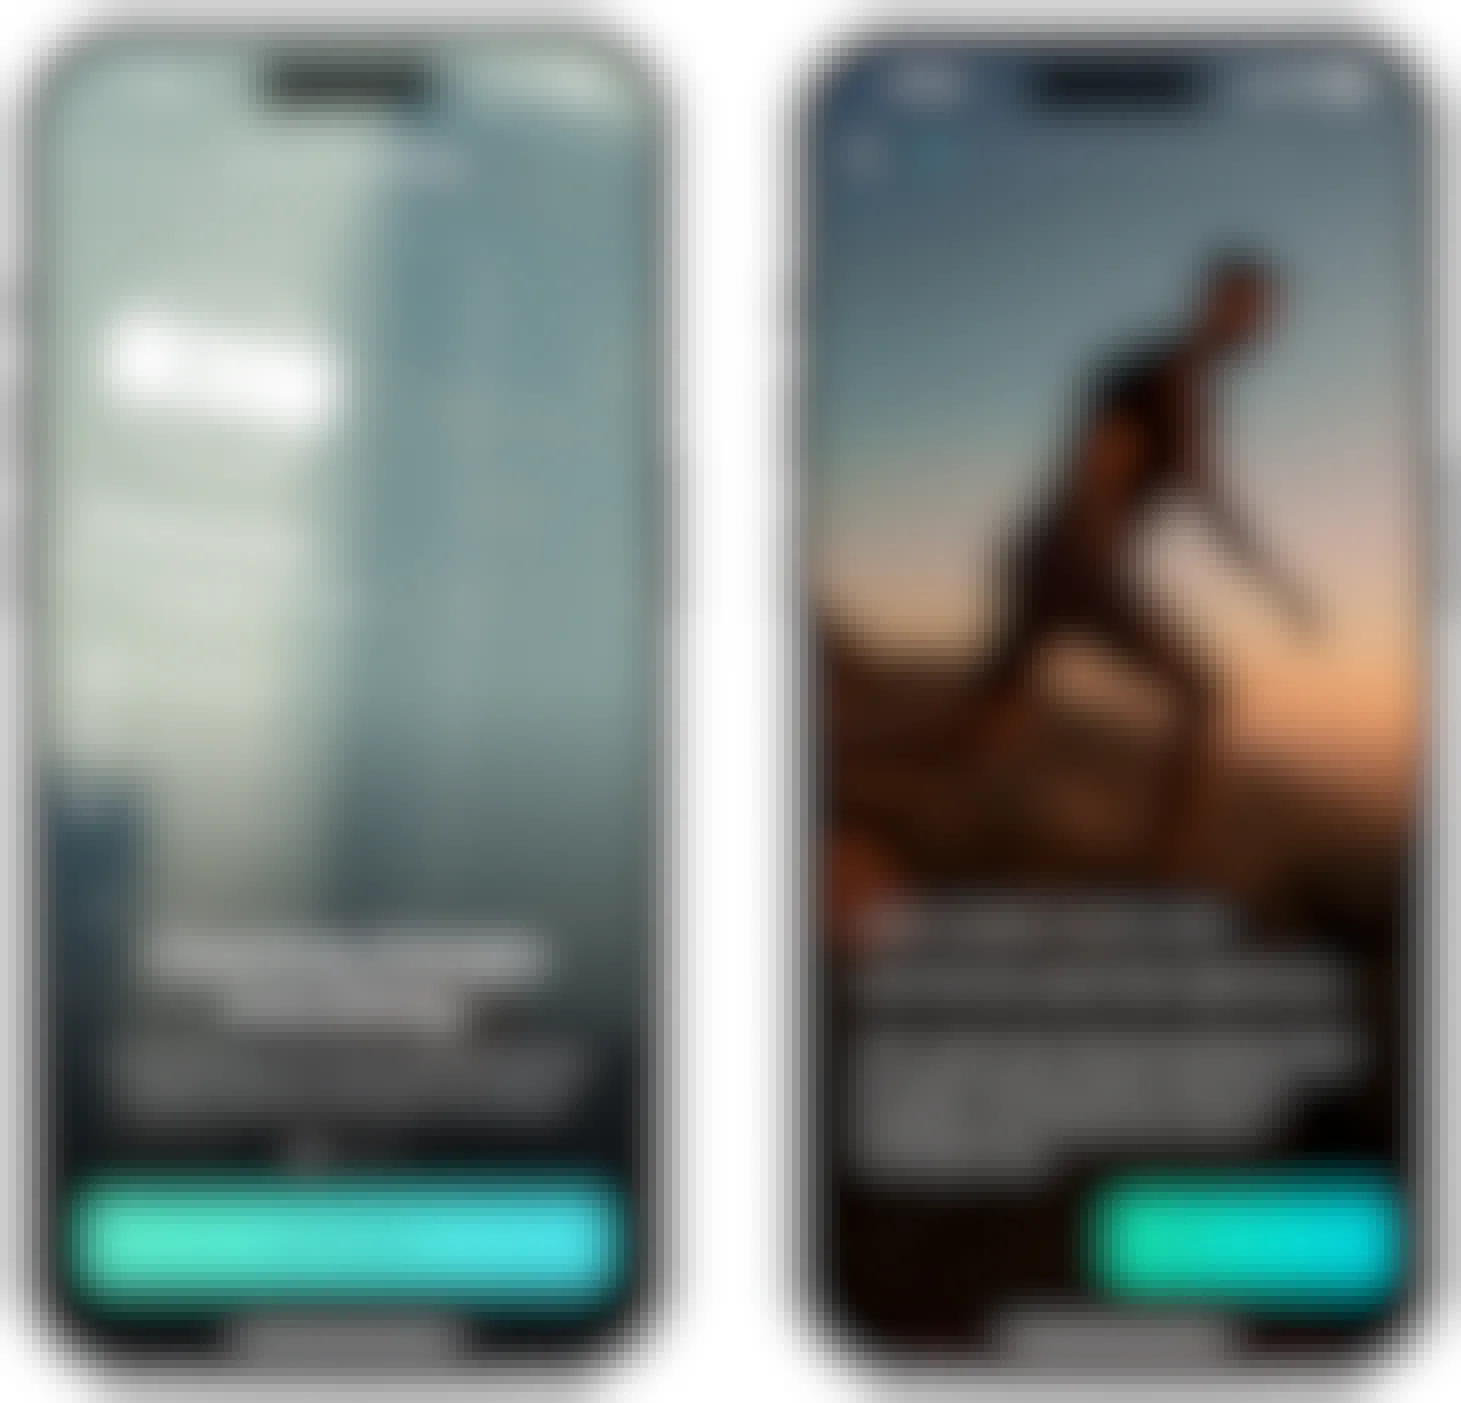 Screenshots from the Future fitness app on two iPhone screens